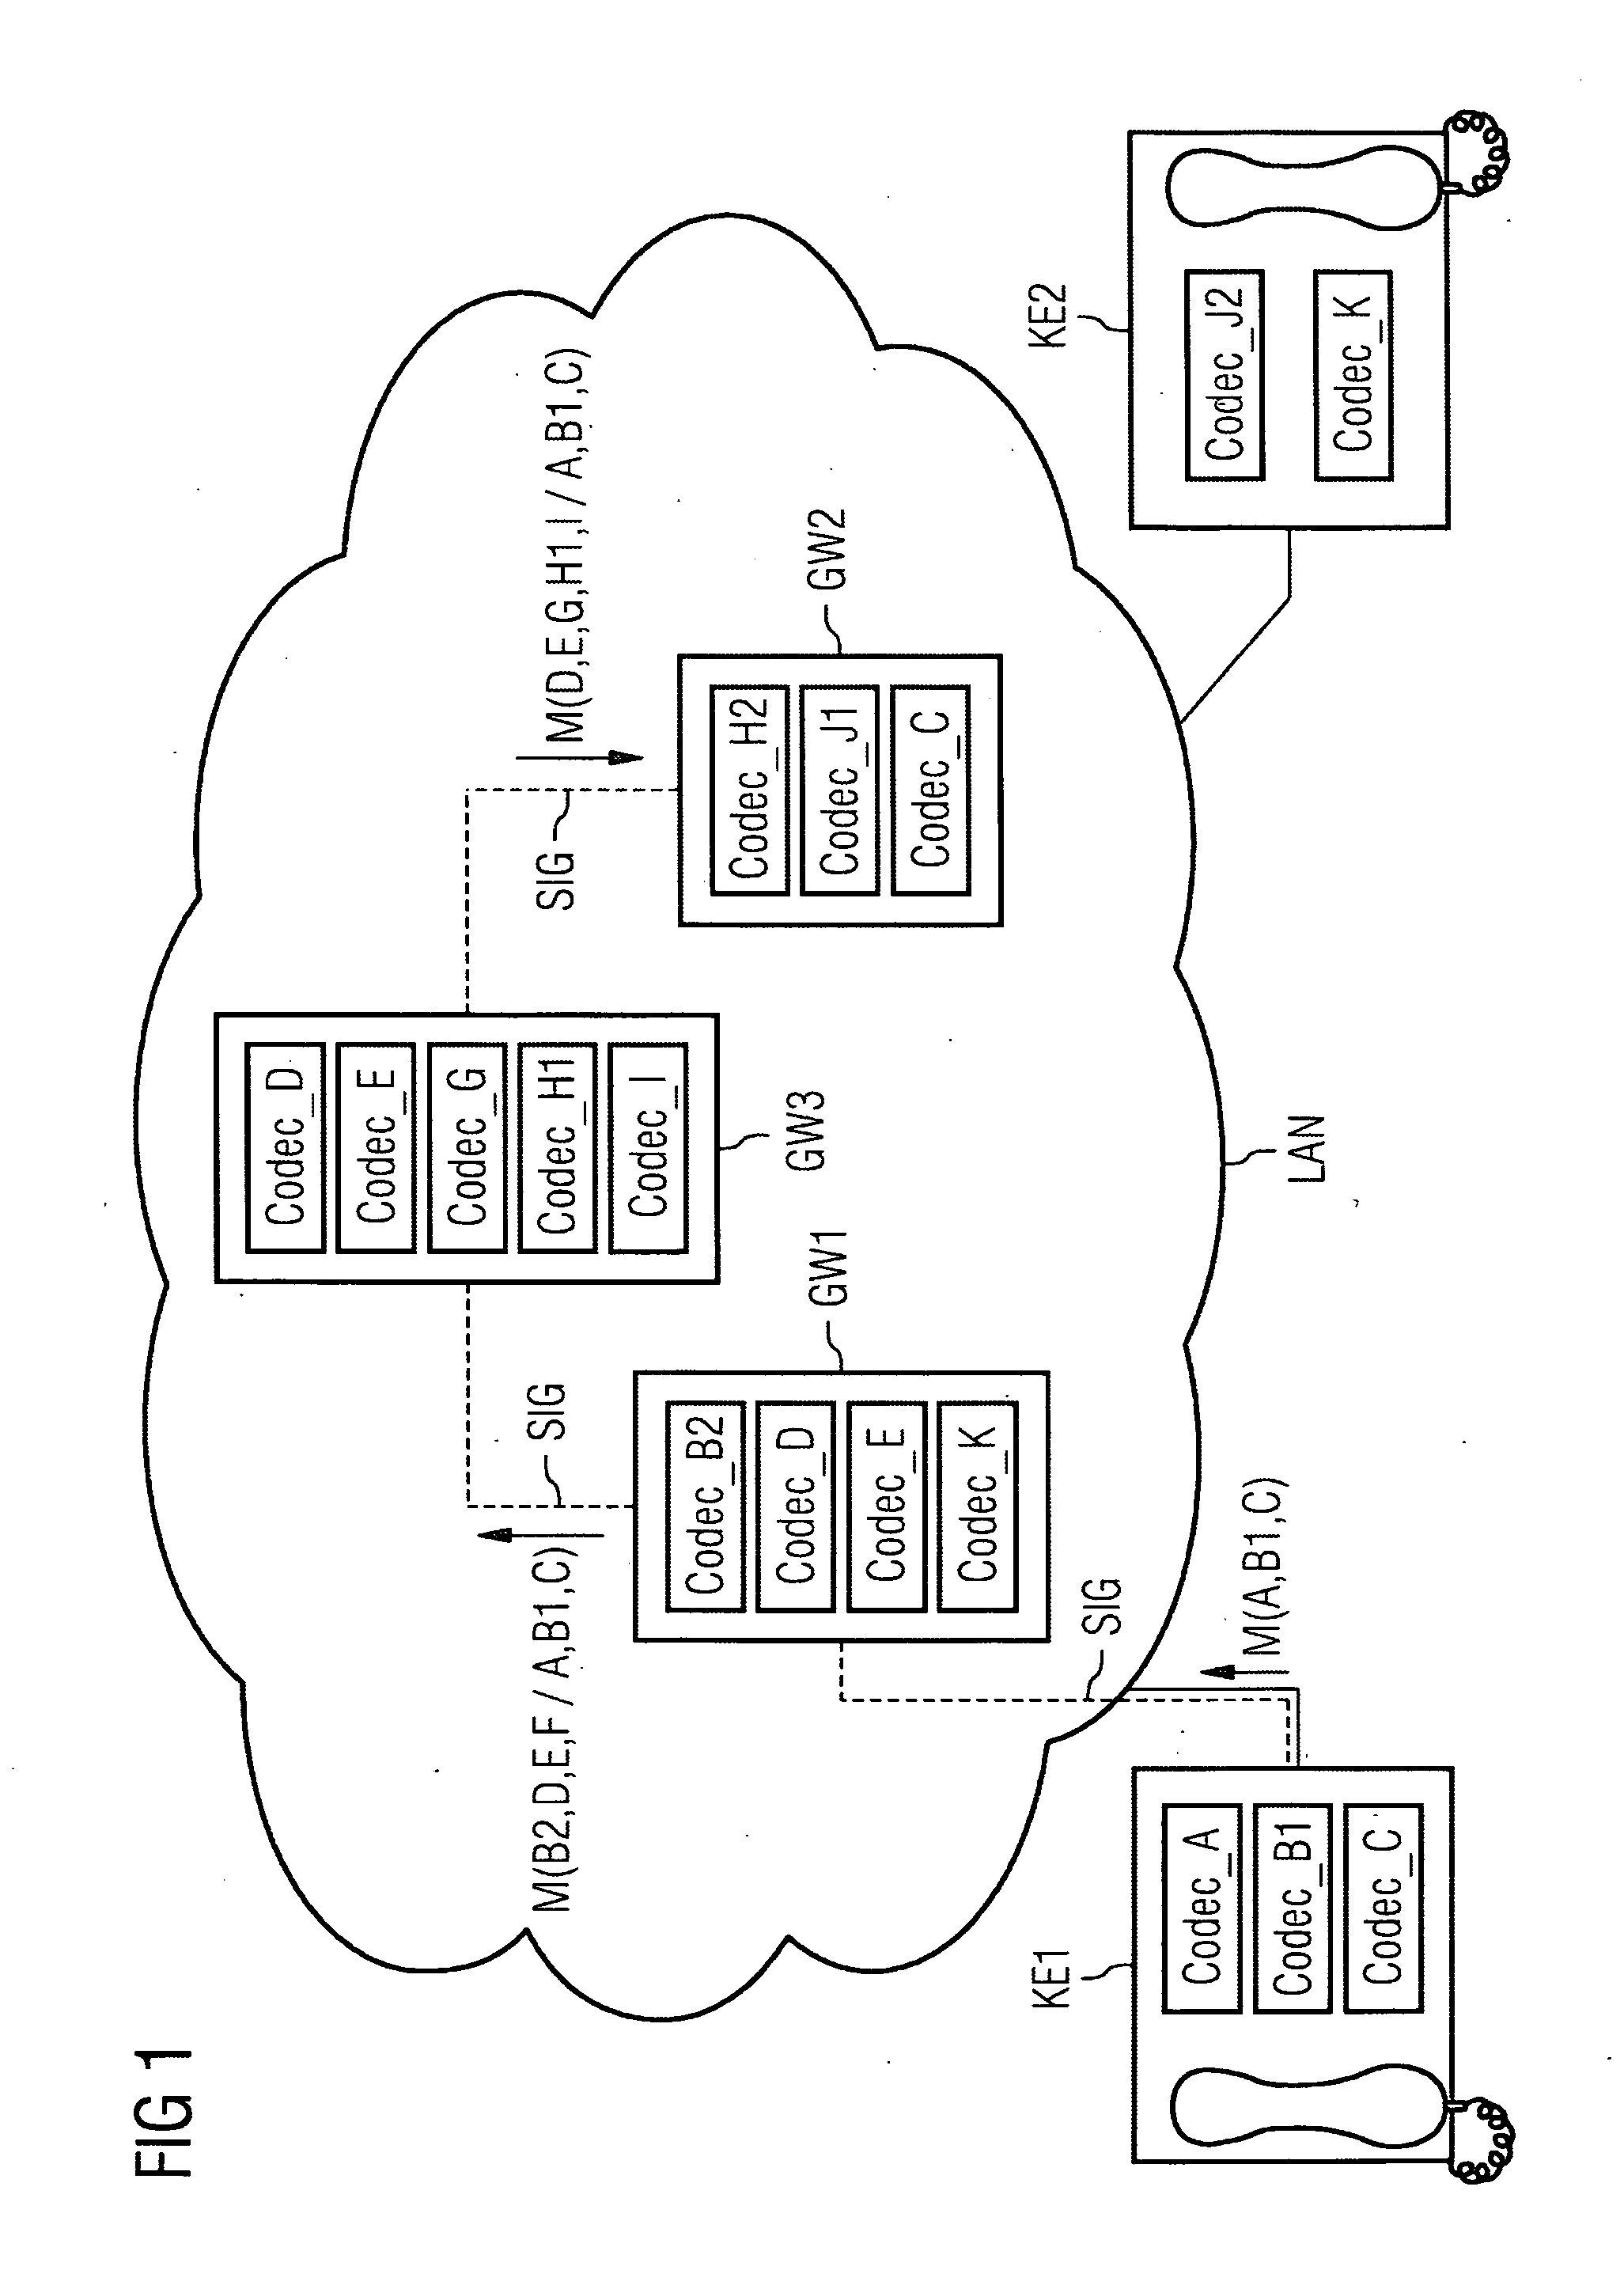 Method, Server Device and Converting Device for Setting Up a Payload-Data Connection